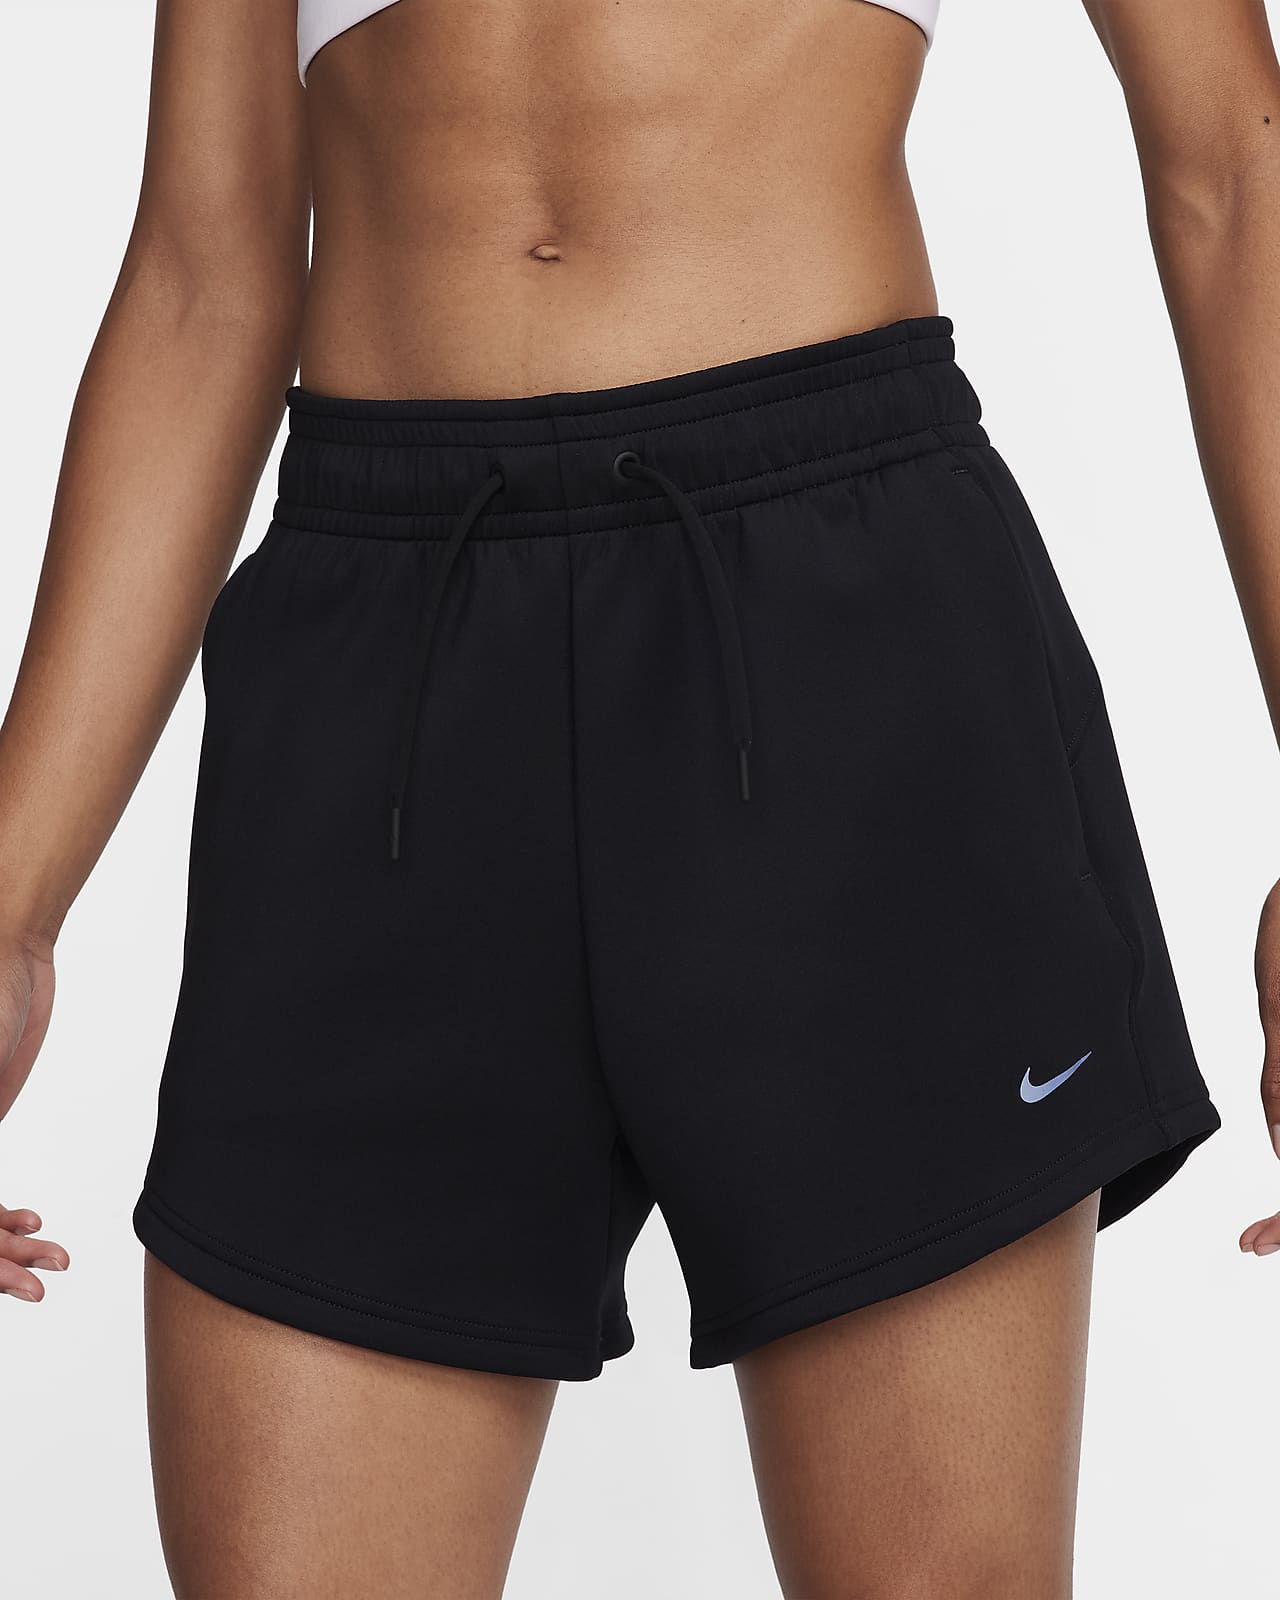 NIKE Womens DRI-FIT Volleyball Shorts-Black 108720-010 - Large - NEW NWT